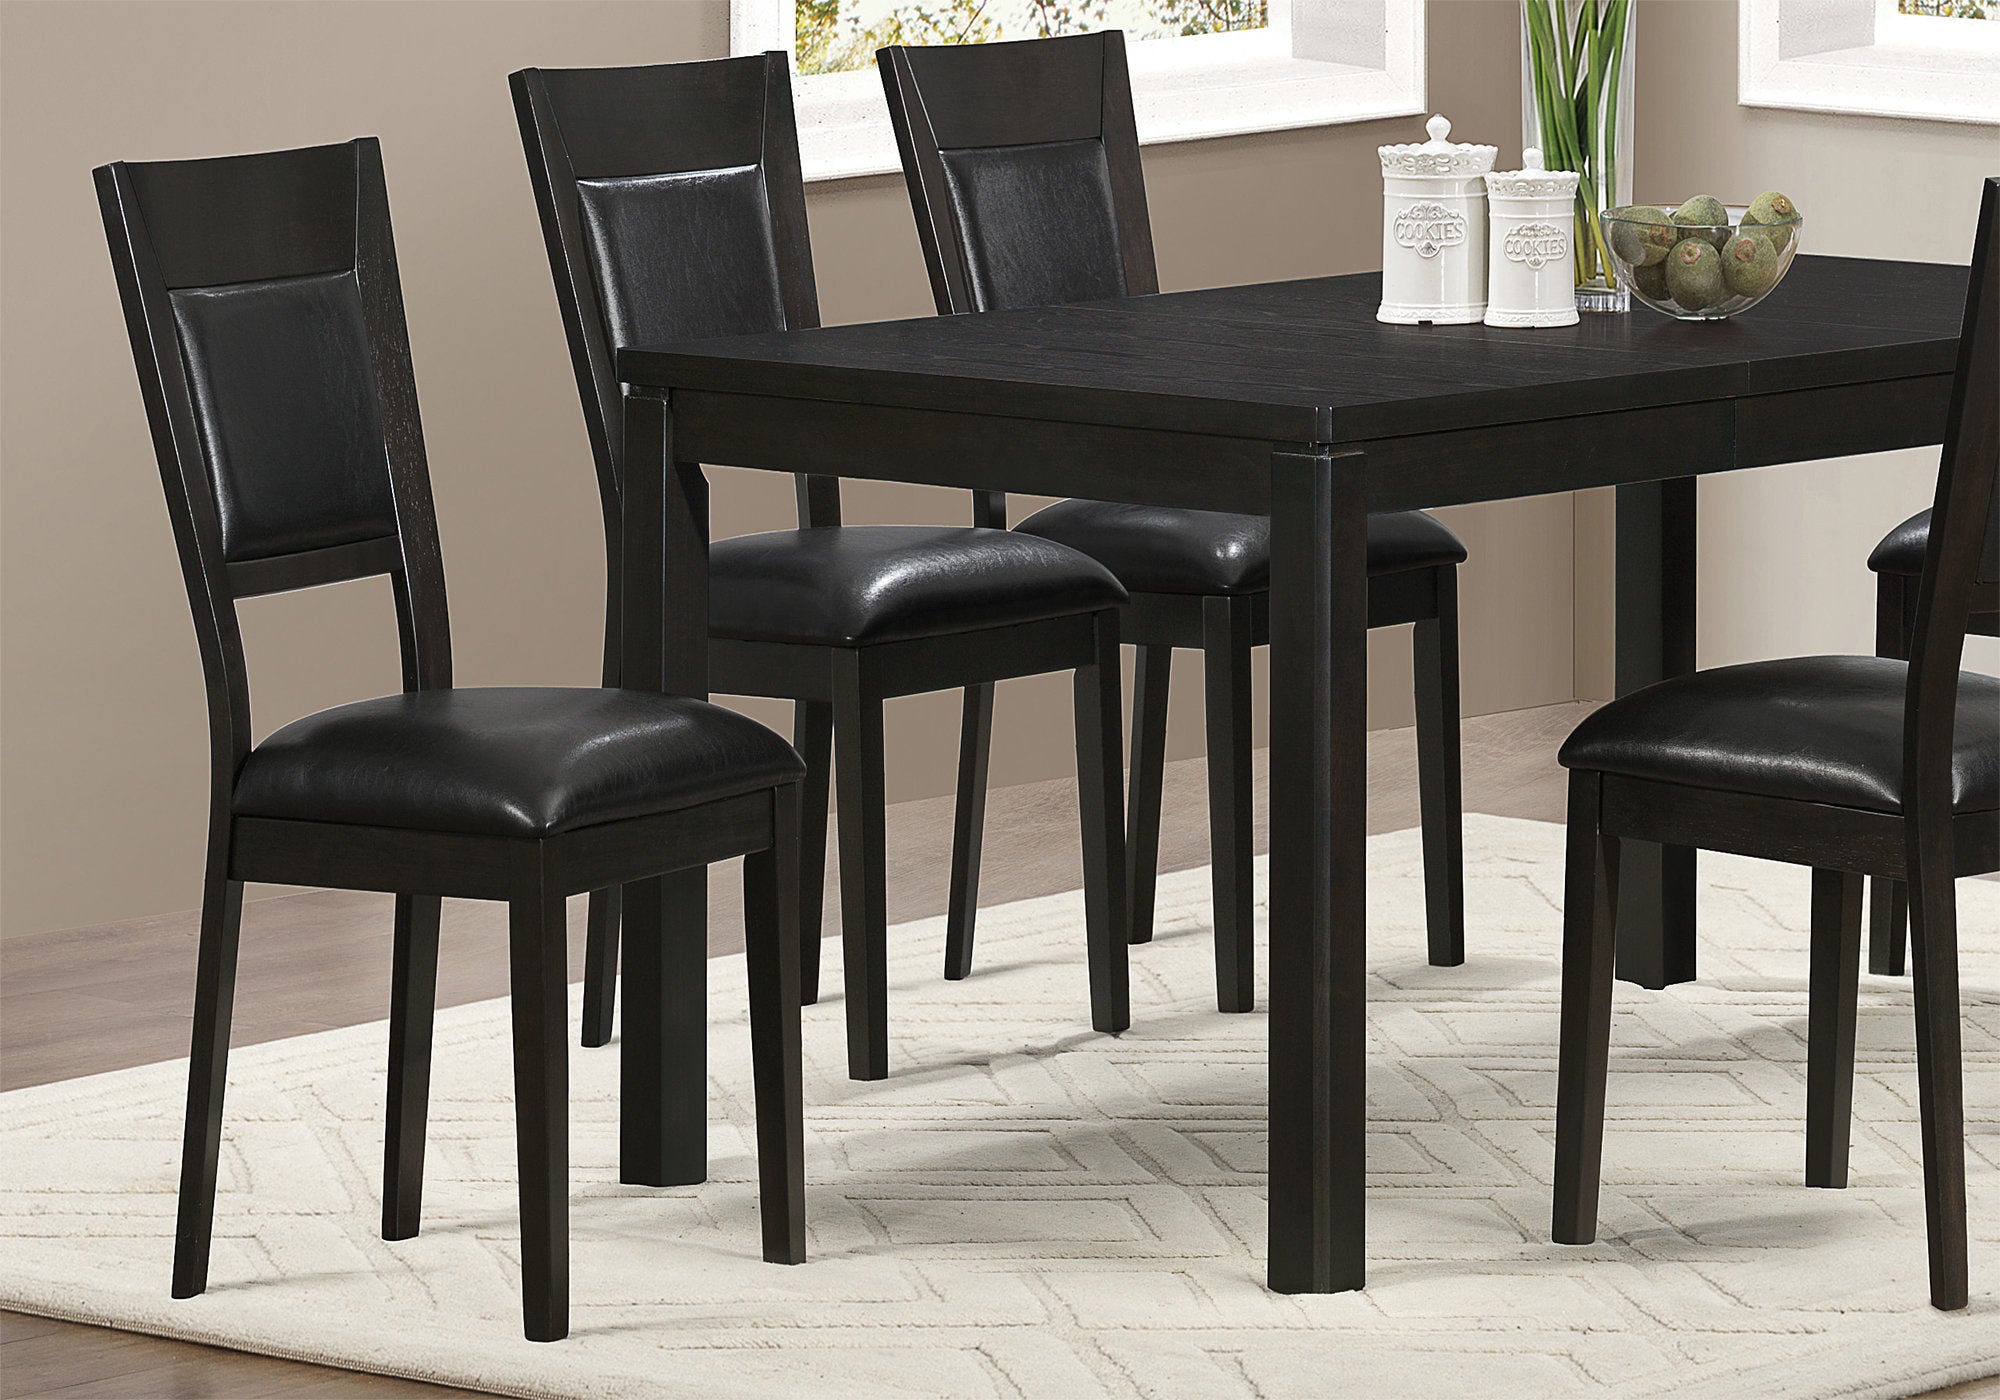 Comfort Wooden Dining Chair With Padded Back (Set of 2 - Espresso)